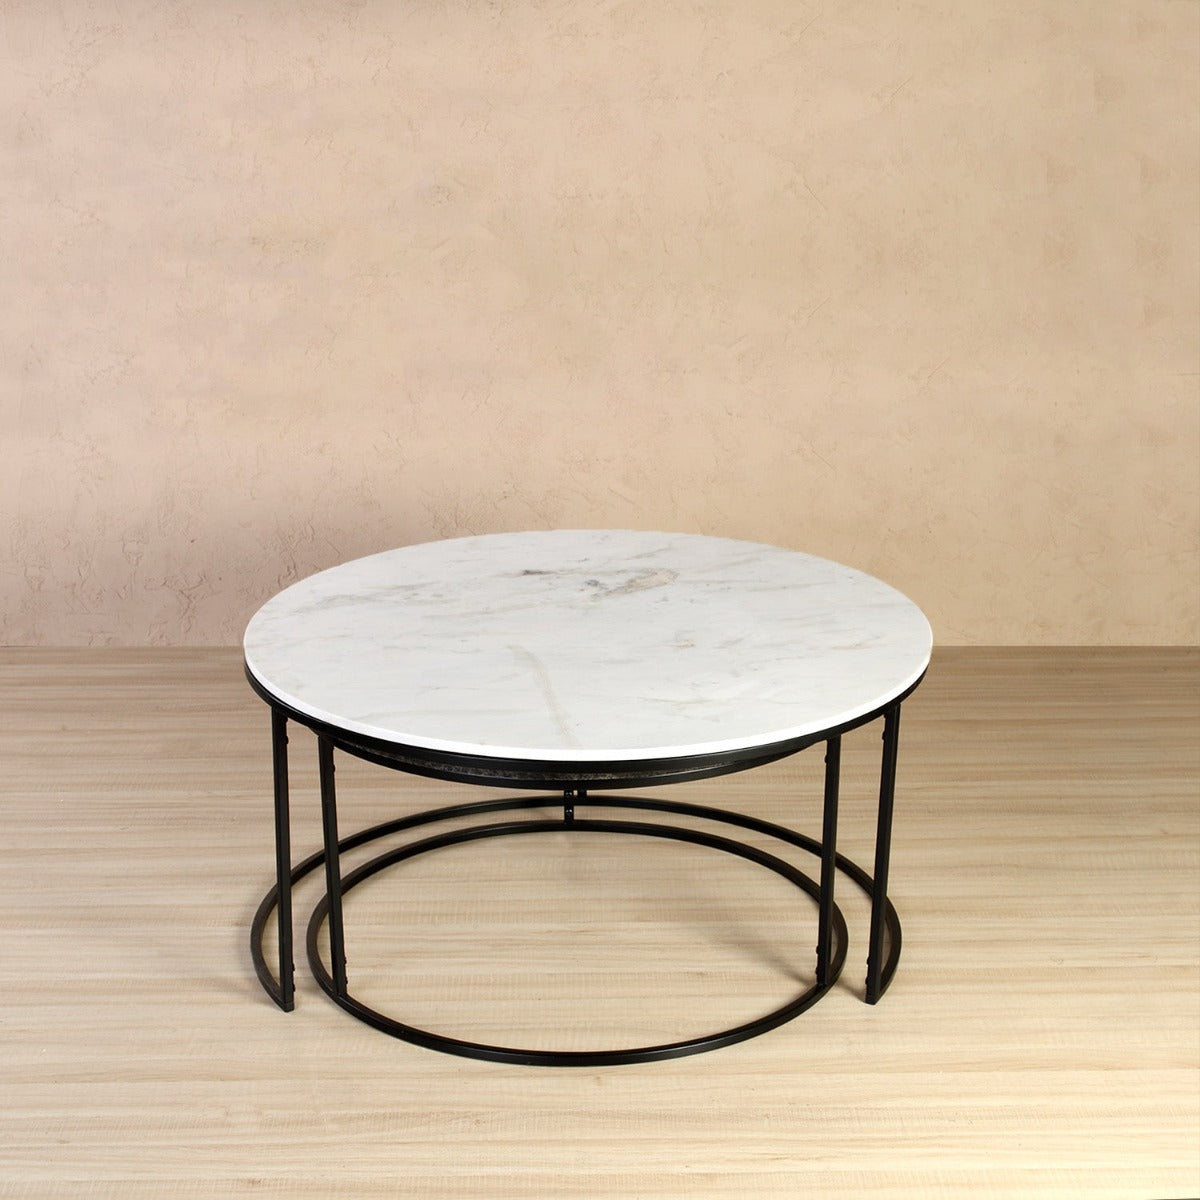 Serbia Marble Nesting Coffee Table In Black Finish (Set Of 2)